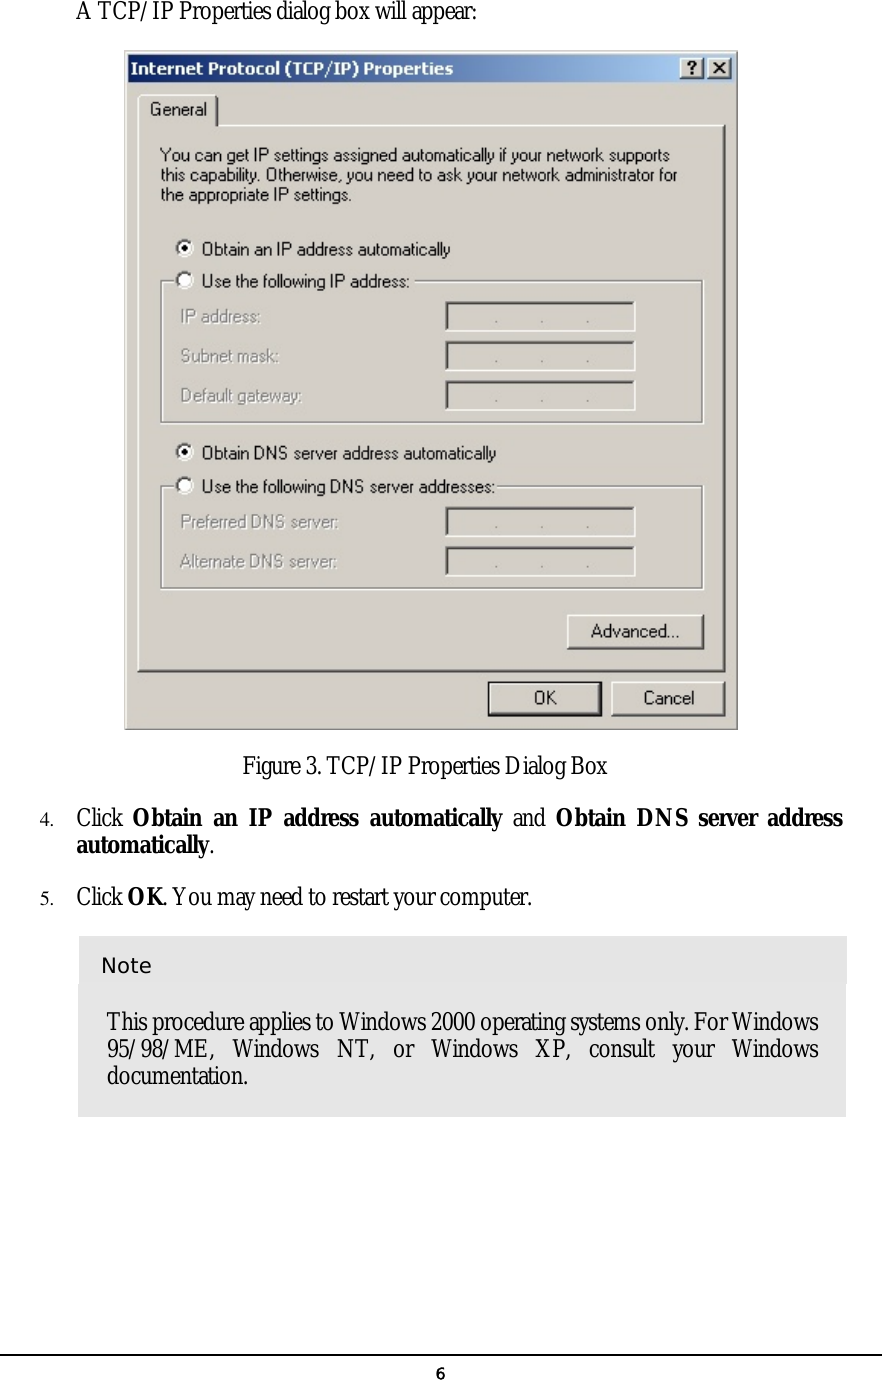   6A TCP/IP Properties dialog box will appear:   Figure 3. TCP/IP Properties Dialog Box 4.  Click  Obtain an IP address automatically and Obtain DNS server address automatically. 5.  Click OK. You may need to restart your computer.  Note This procedure applies to Windows 2000 operating systems only. For Windows 95/98/ME, Windows NT, or Windows XP, consult your Windows documentation. 